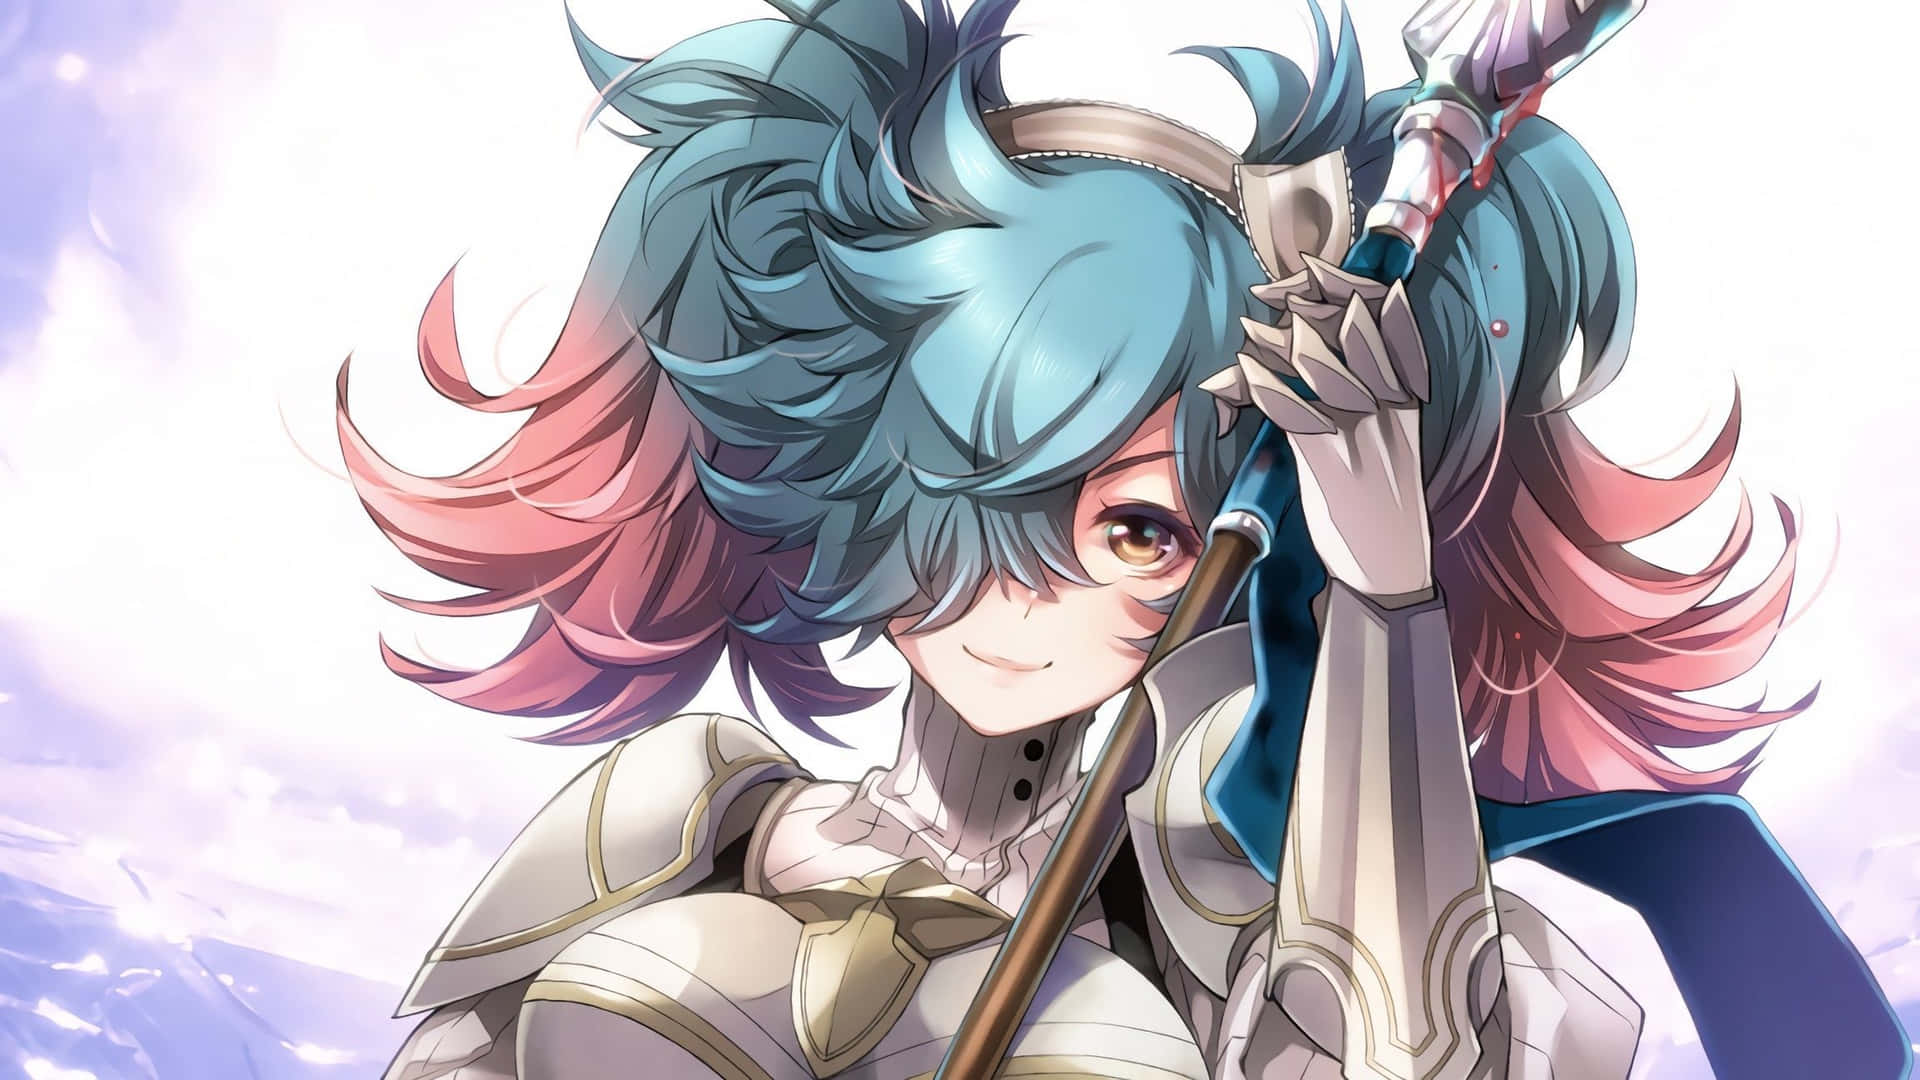 “Fates Is Calling You” Wallpaper